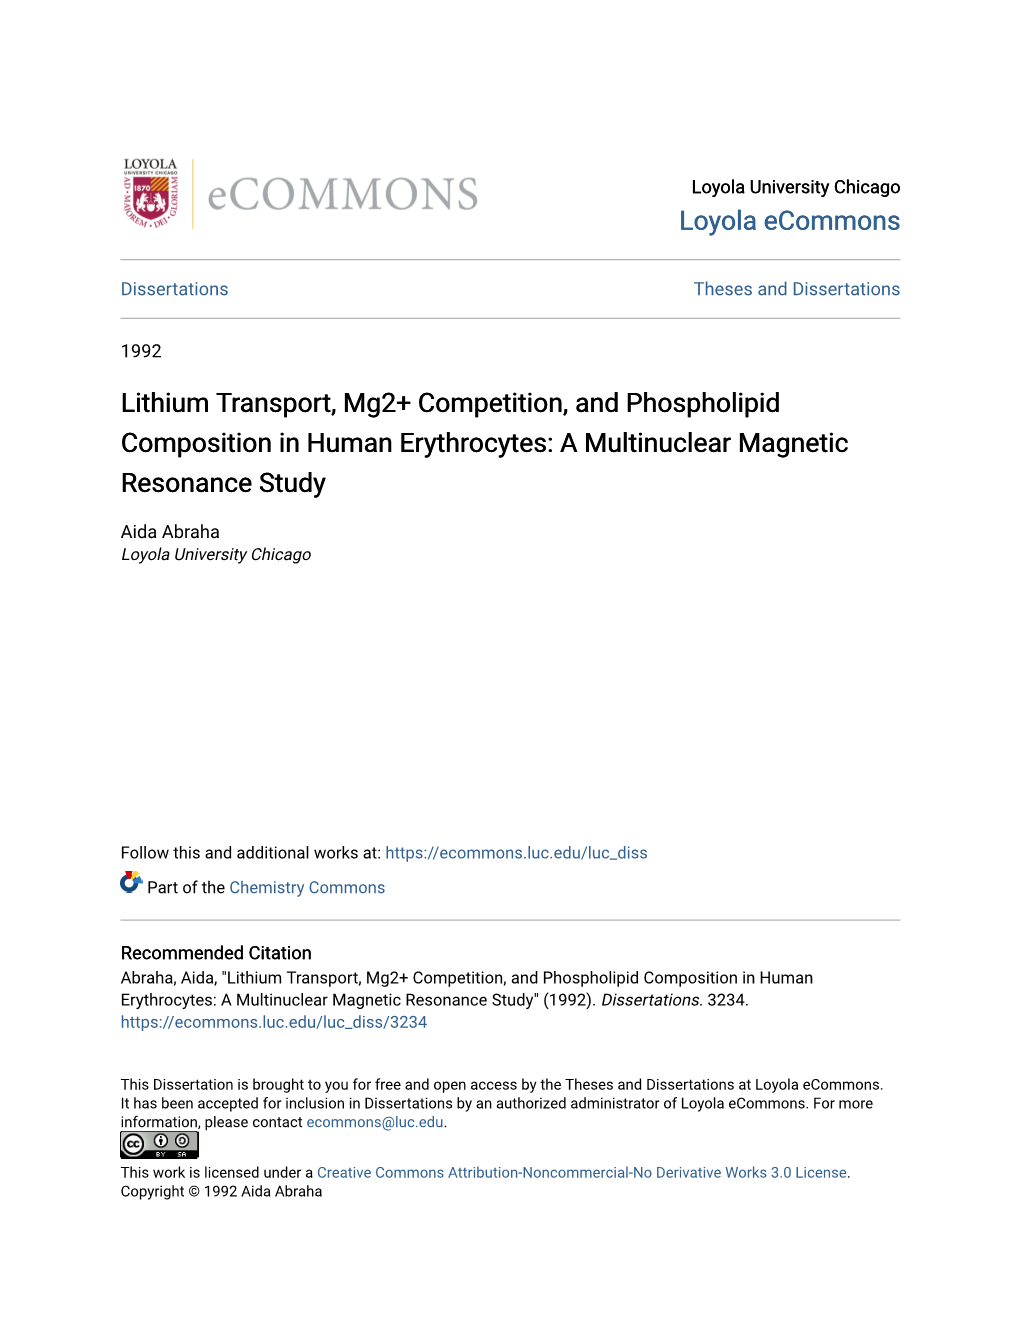 Lithium Transport, Mg2+ Competition, and Phospholipid Composition in Human Erythrocytes: a Multinuclear Magnetic Resonance Study